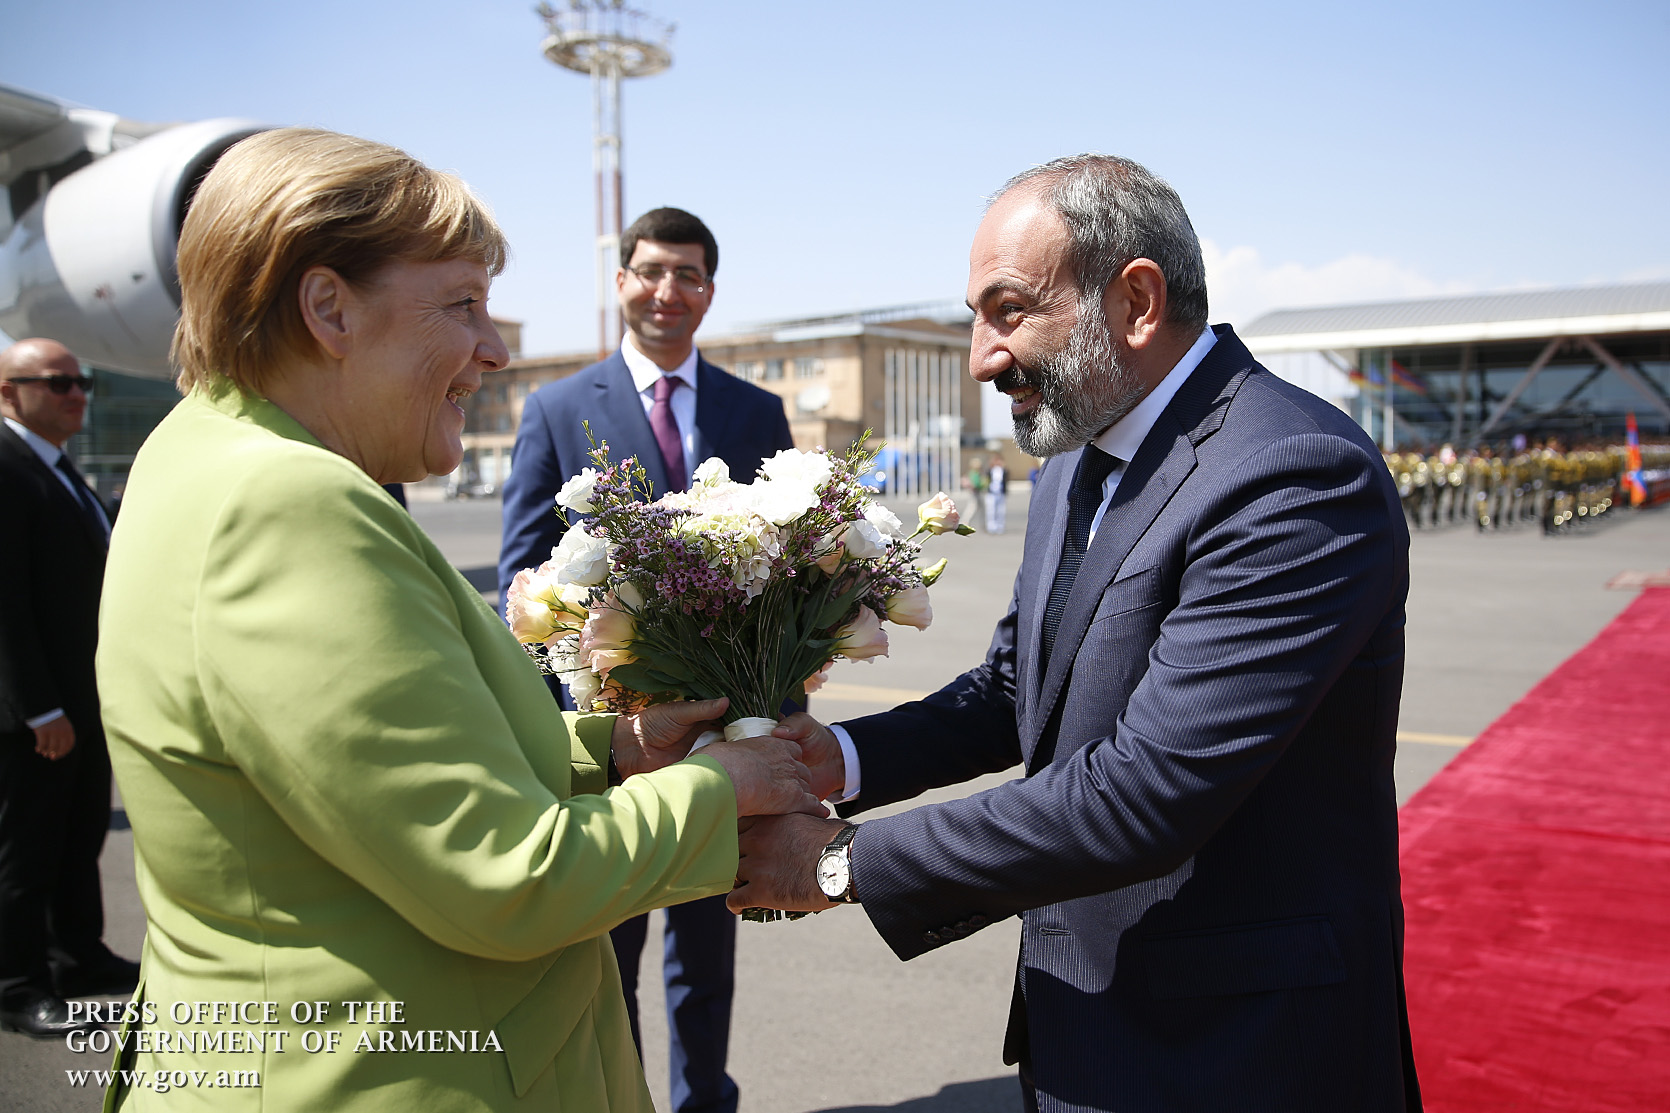 Armenia values consistent deepening of relations with Germany: Pashinyan congratulates Merkel on National Day